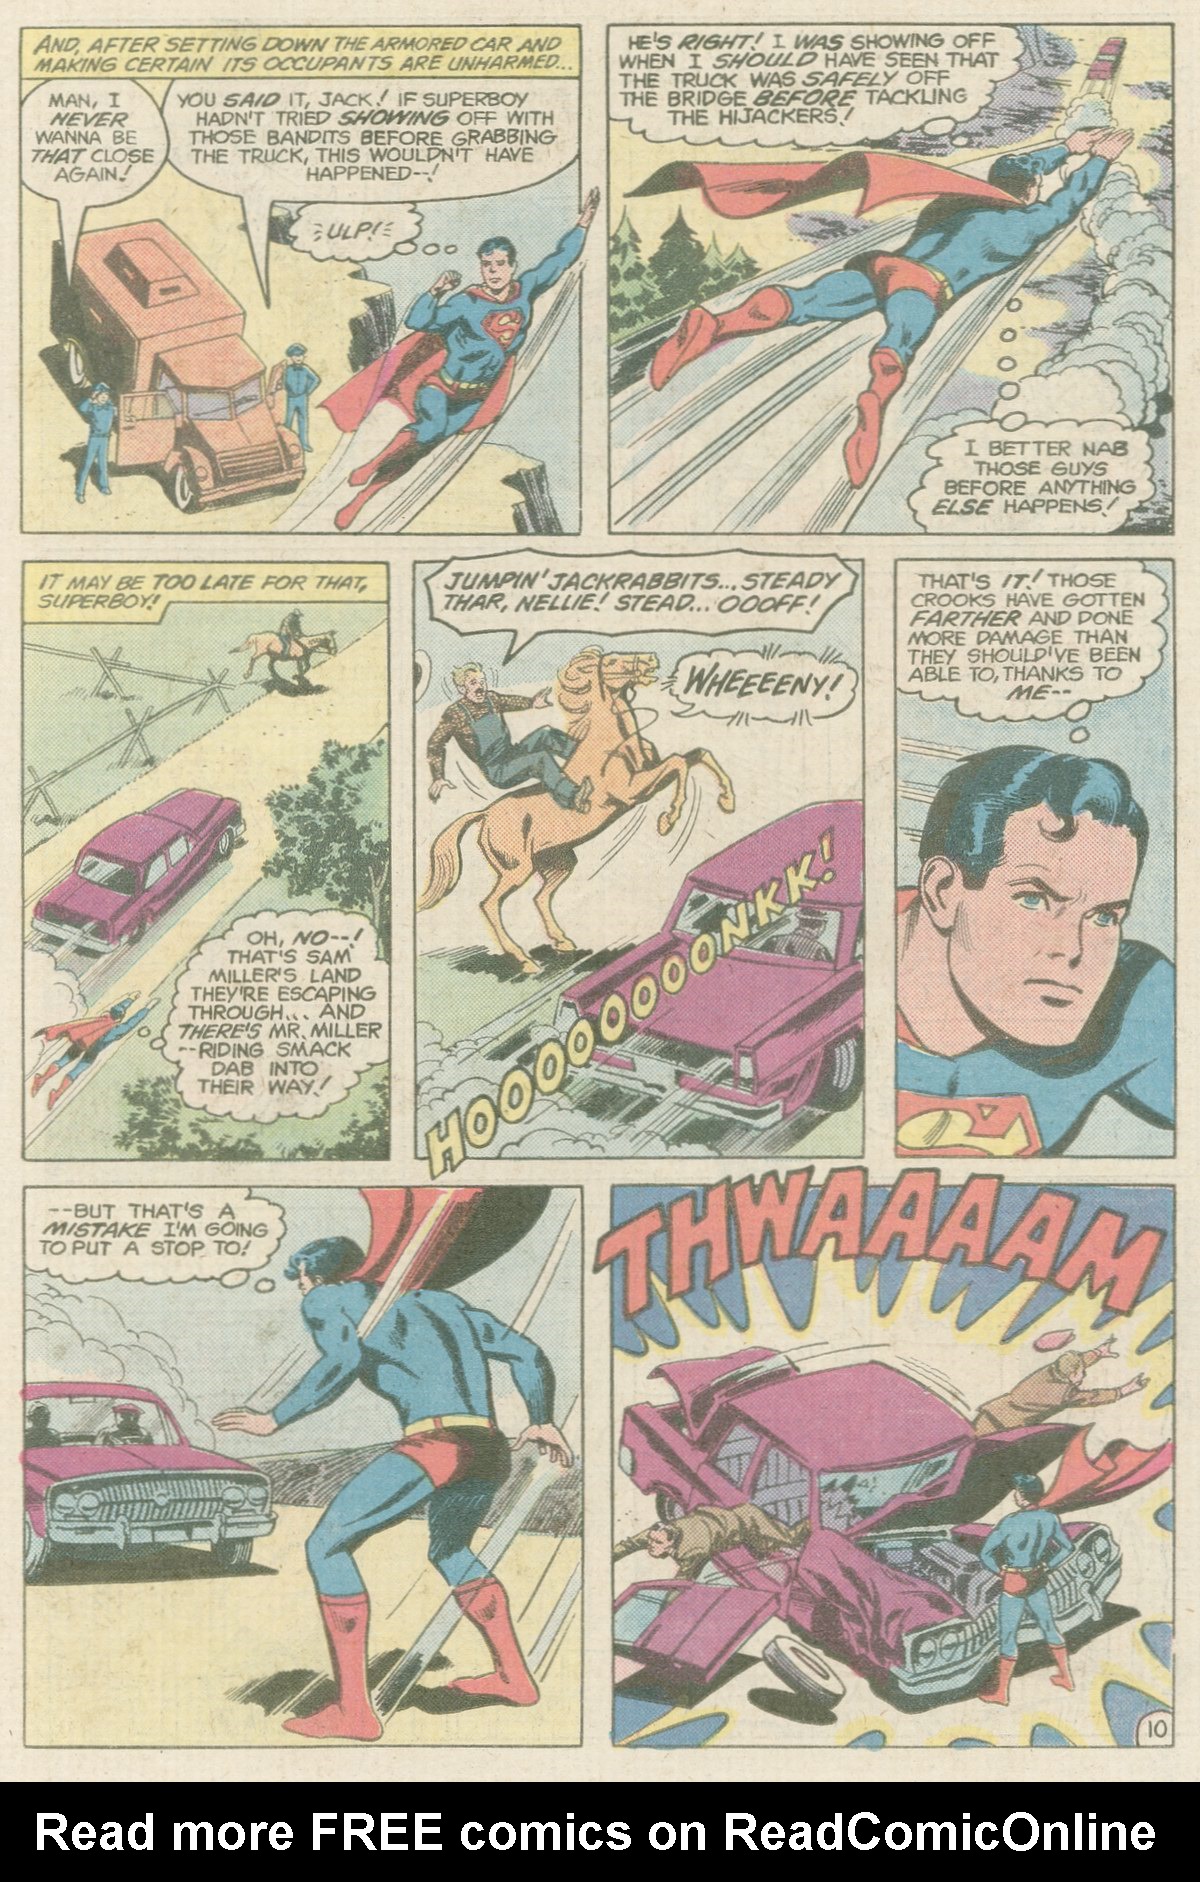 The New Adventures of Superboy 40 Page 10